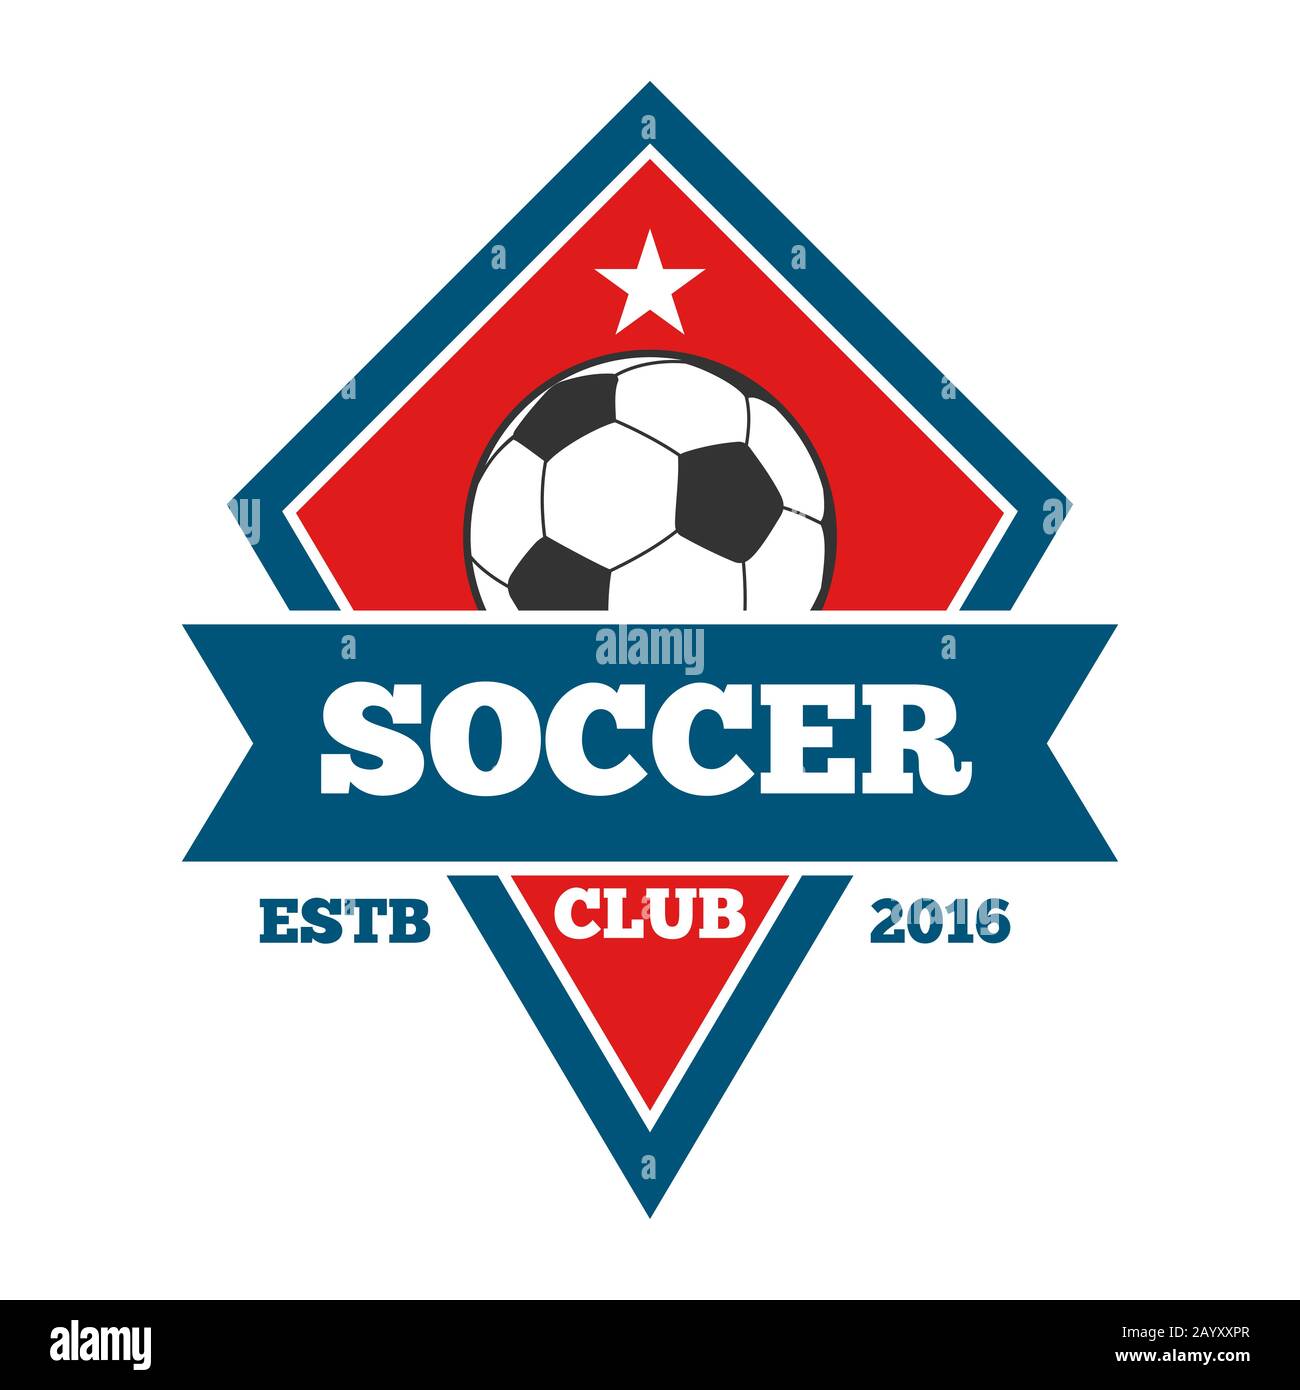 Vector soccer logo, badge, emblem template in red and blue. Football badge and banner illustration Stock Vector